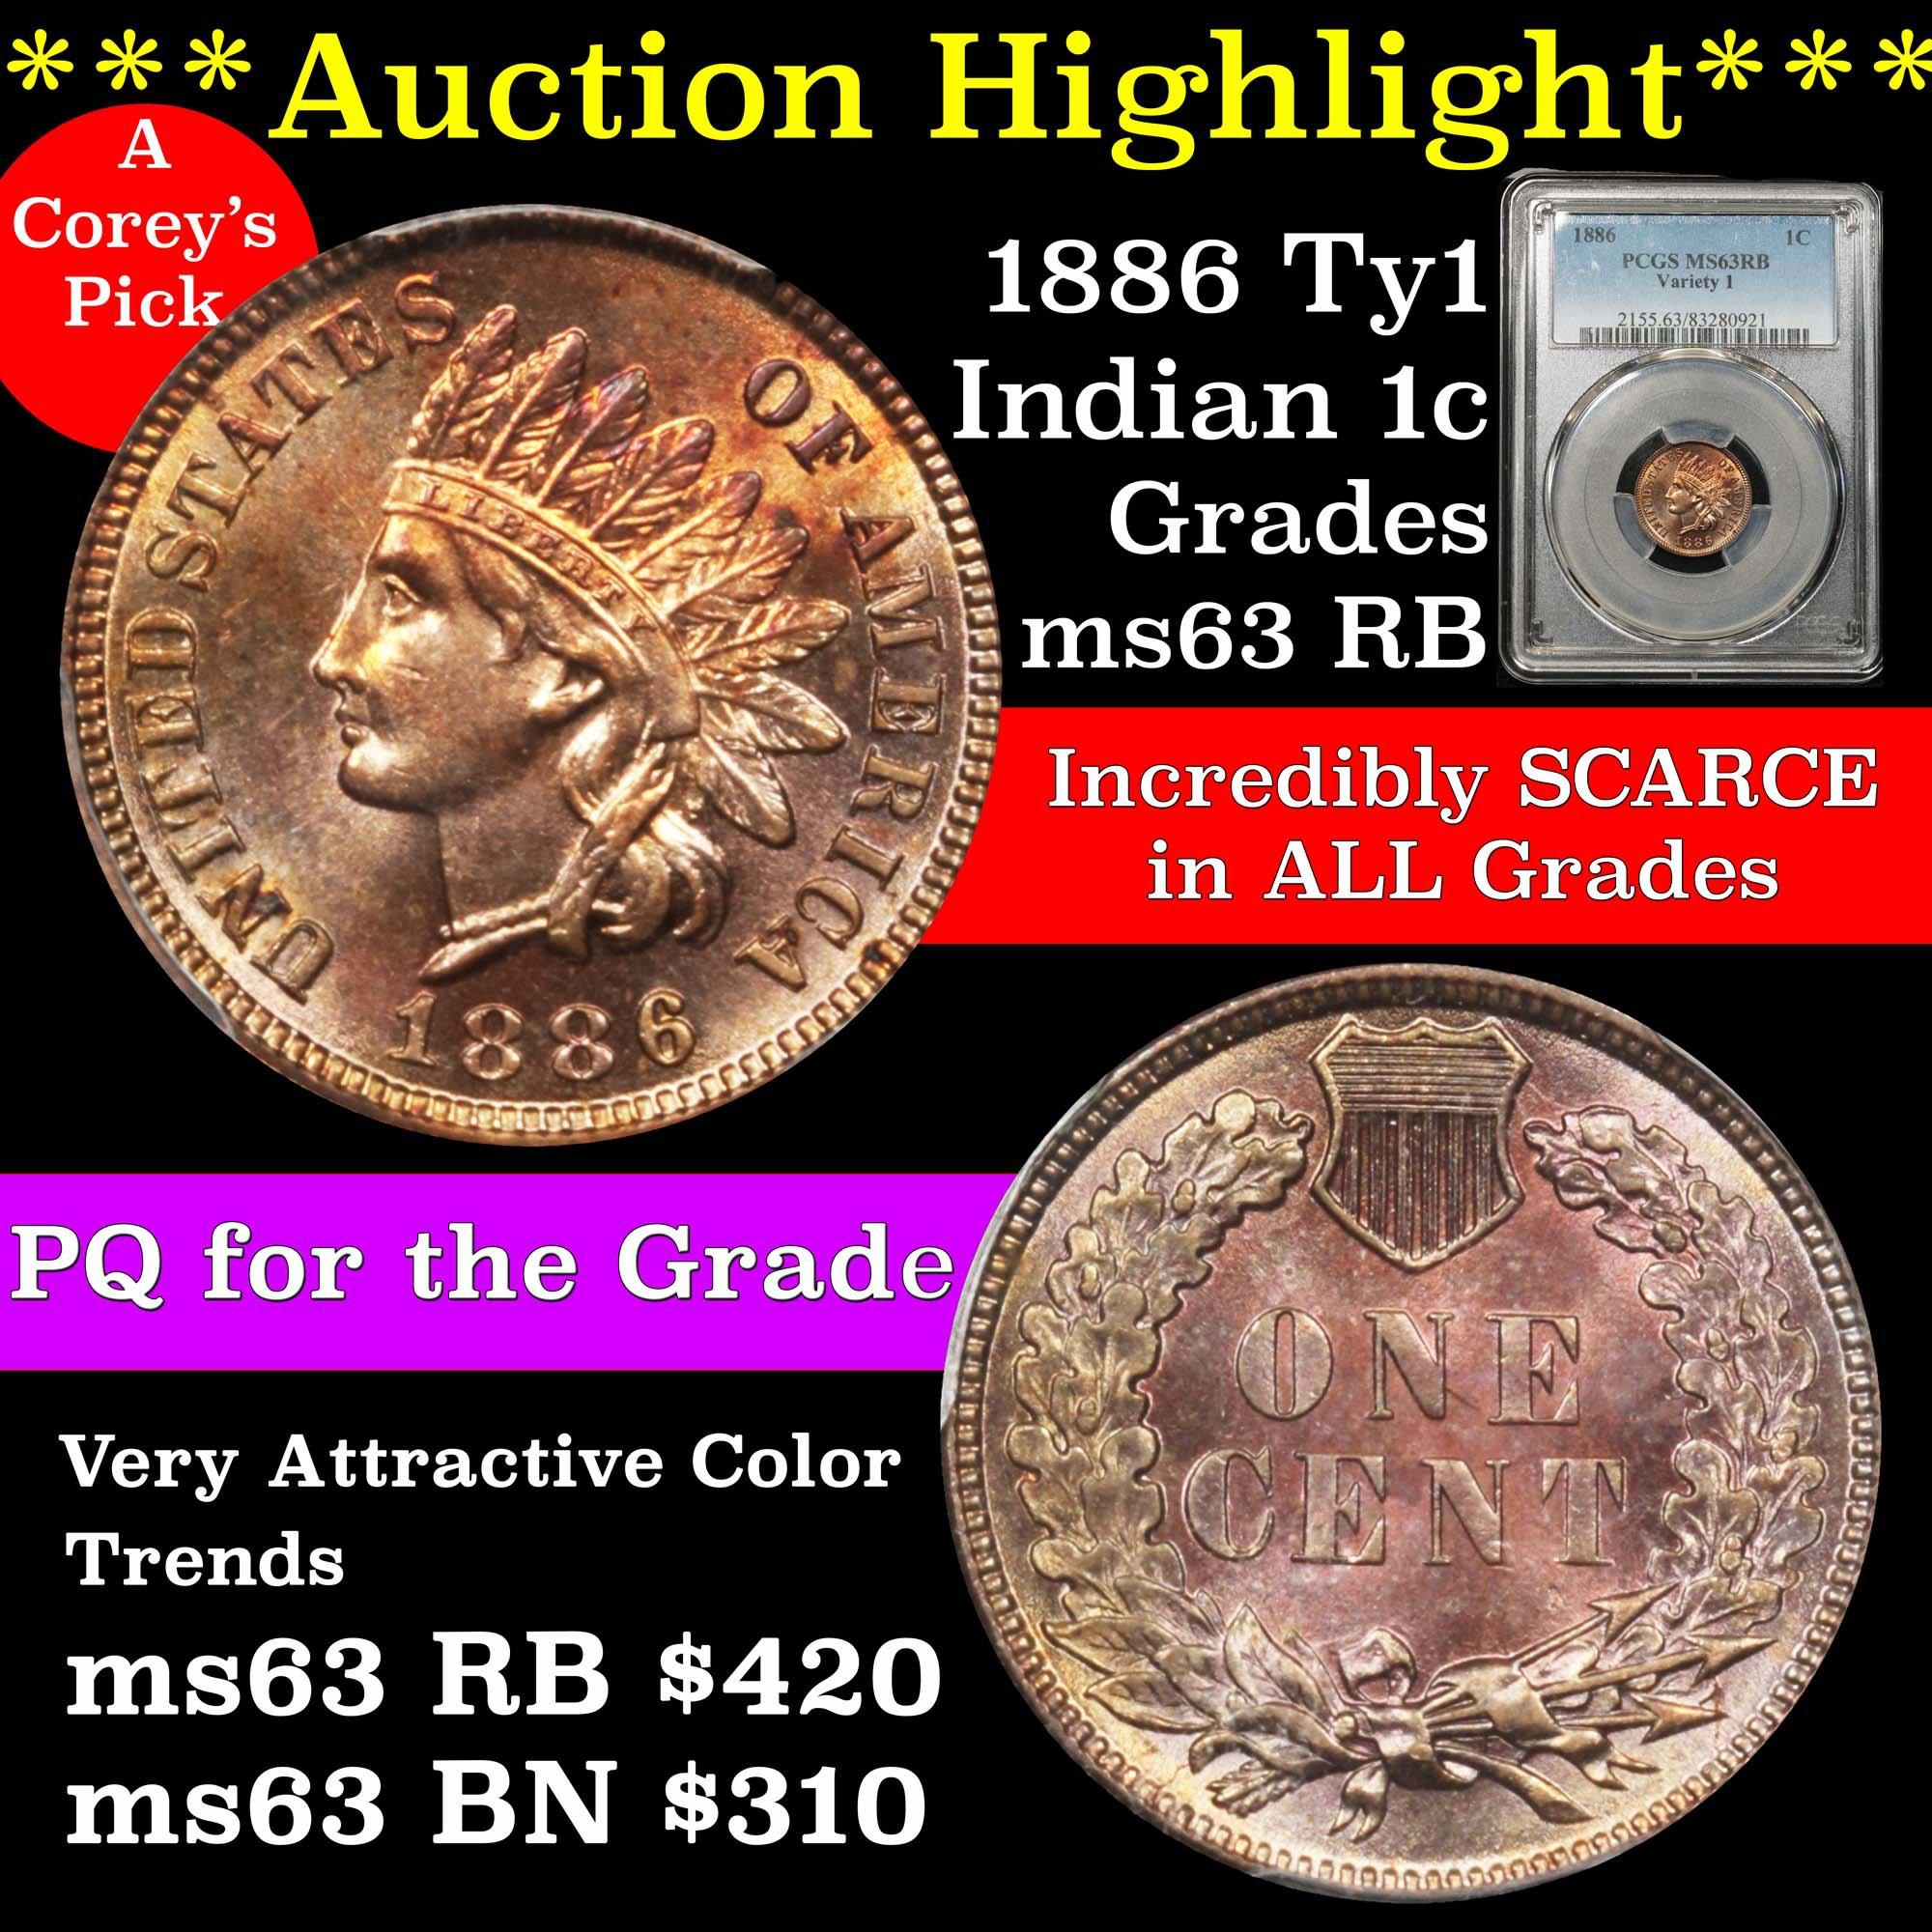 ***Auction Highlight*** Incredibly scarce in ms63 and above 1886 Ty1 Indian 1c ms63 RB PCGS PQ (fc)